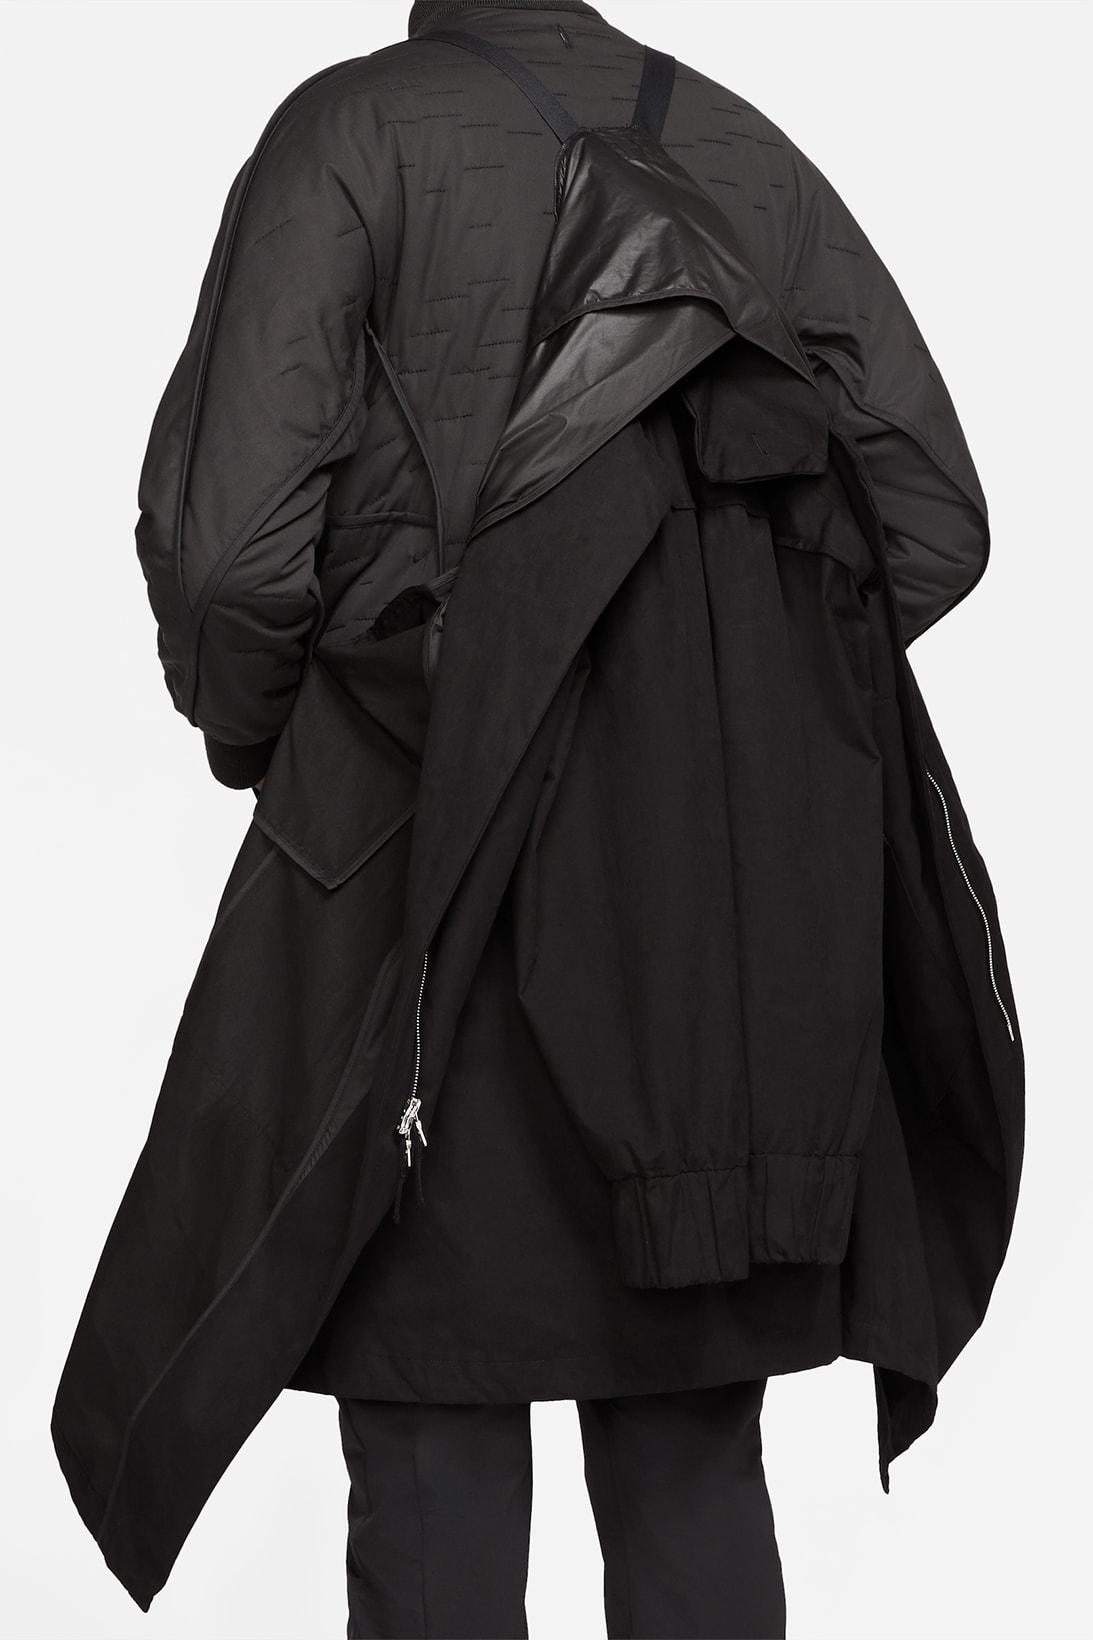 nike design exploration apparel collection outerwear jacket